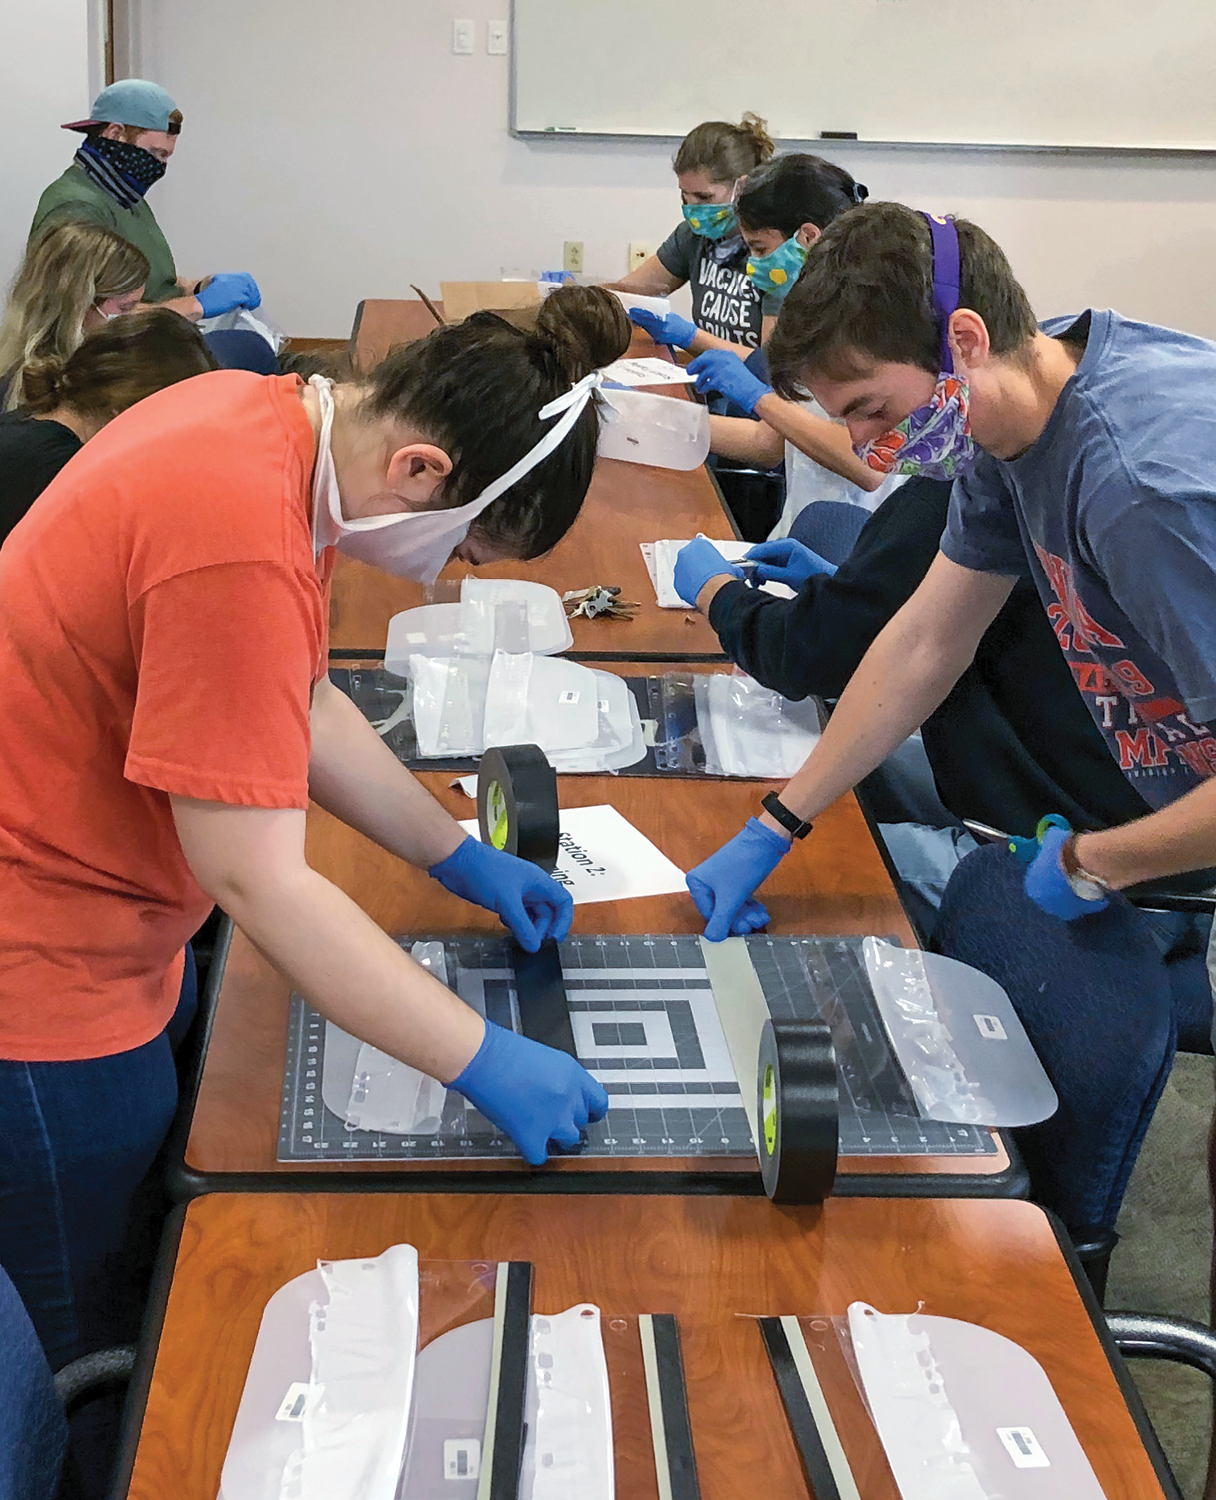 A female and male student in the foreground wear face covering and protective gloves as they use duct tape to cover the holes on the plastic coverings used to make the face shields.